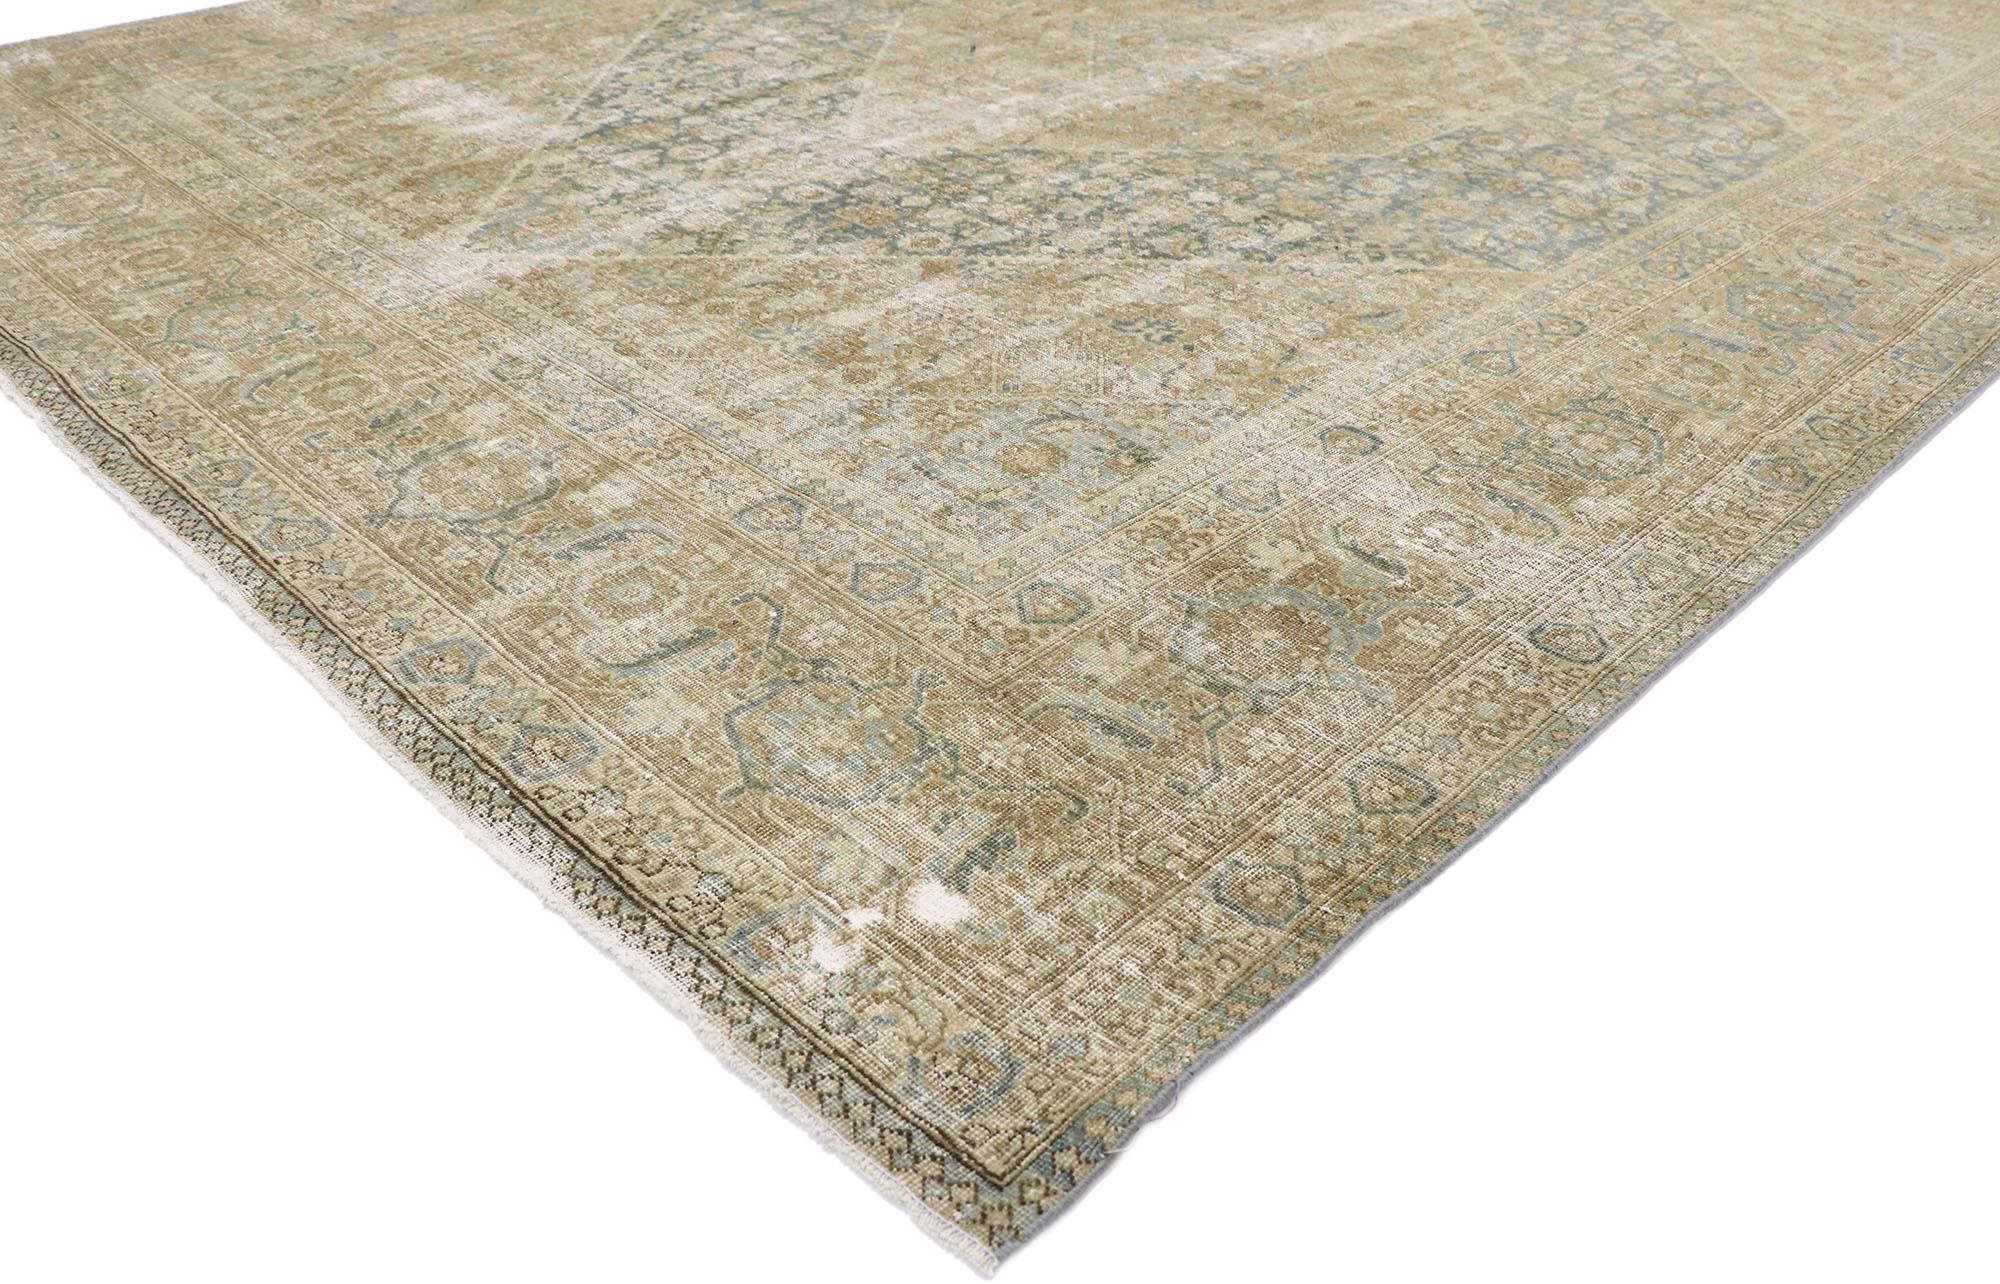 60865 Distressed Antique Persian Mahi Tabriz Rug with Modern Rustic Style 08'01 x 11'03. Effortlessly chic with rustic sensibility, this hand-knotted wool distressed antique Persian Mahi Tabriz rug is a captivating vision of woven beauty. The